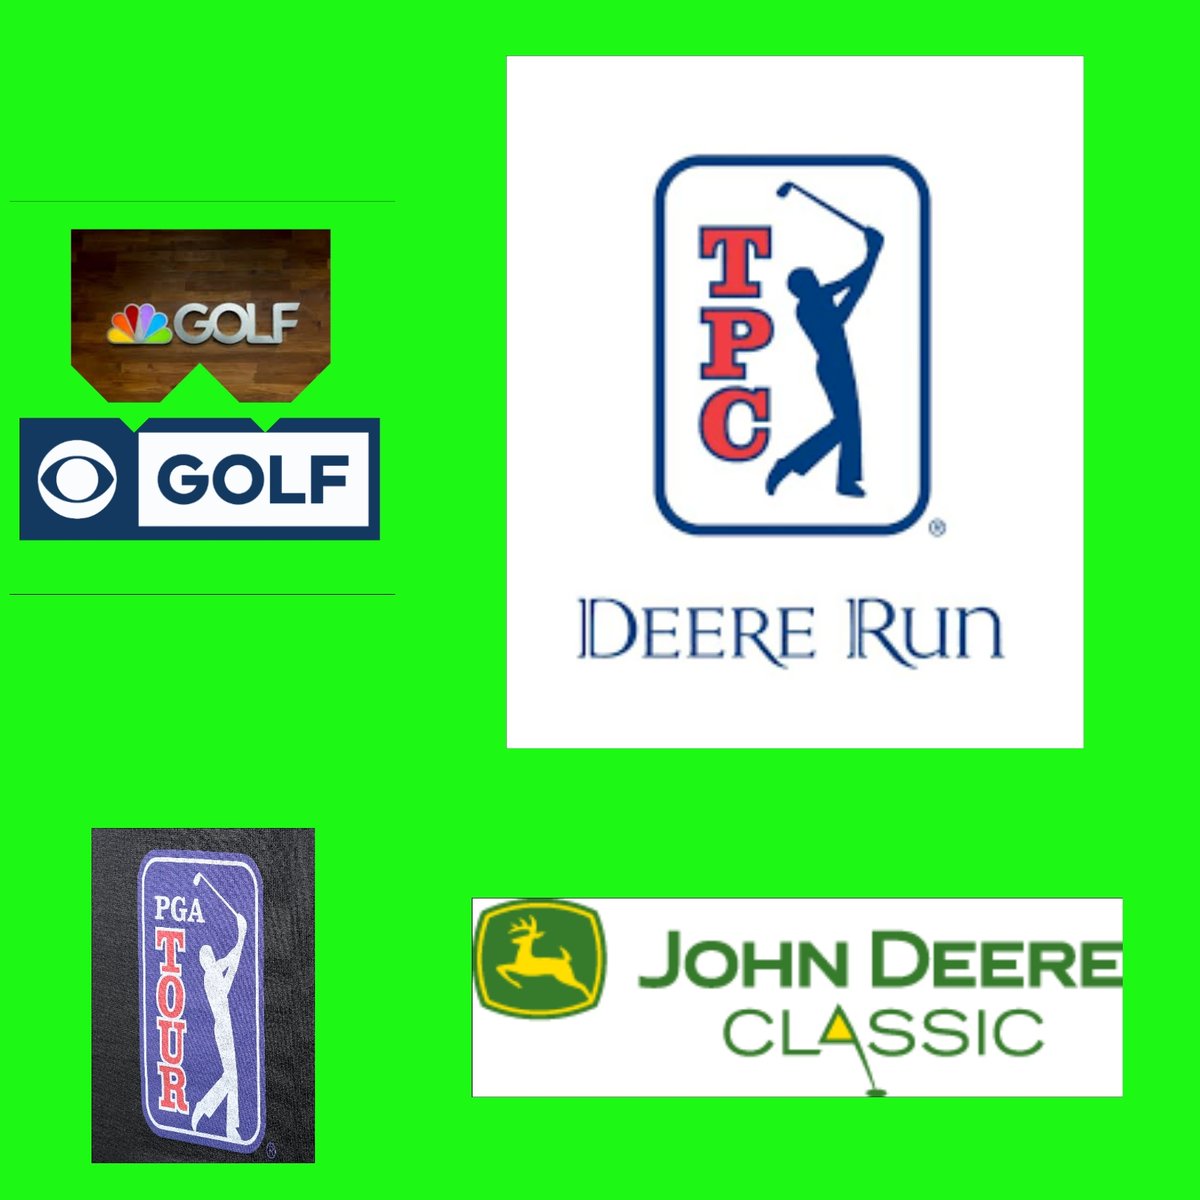 This Week men in the #PGATOUR are playing in the #JohnDeereClassic for the #JDC23 with coverage ALL week long airing on Golf Channel with play over the weekend on CBS so look everybody don't miss it because it should be really fun to watch this event